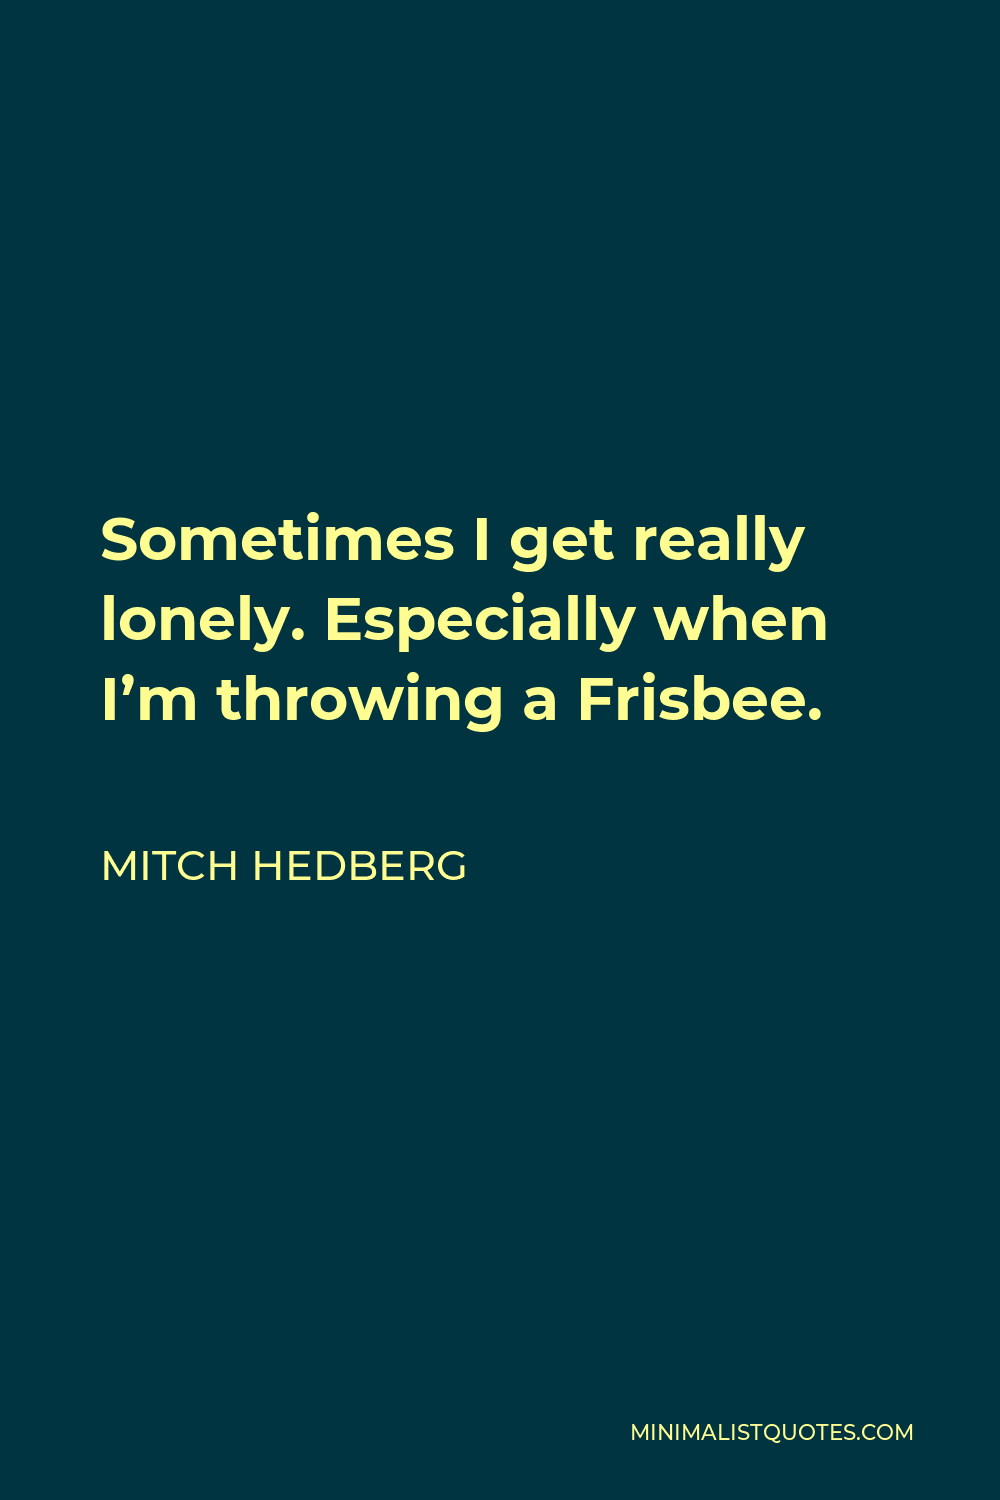 Mitch Hedberg Quote - Sometimes I get really lonely. Especially when I’m throwing a Frisbee.